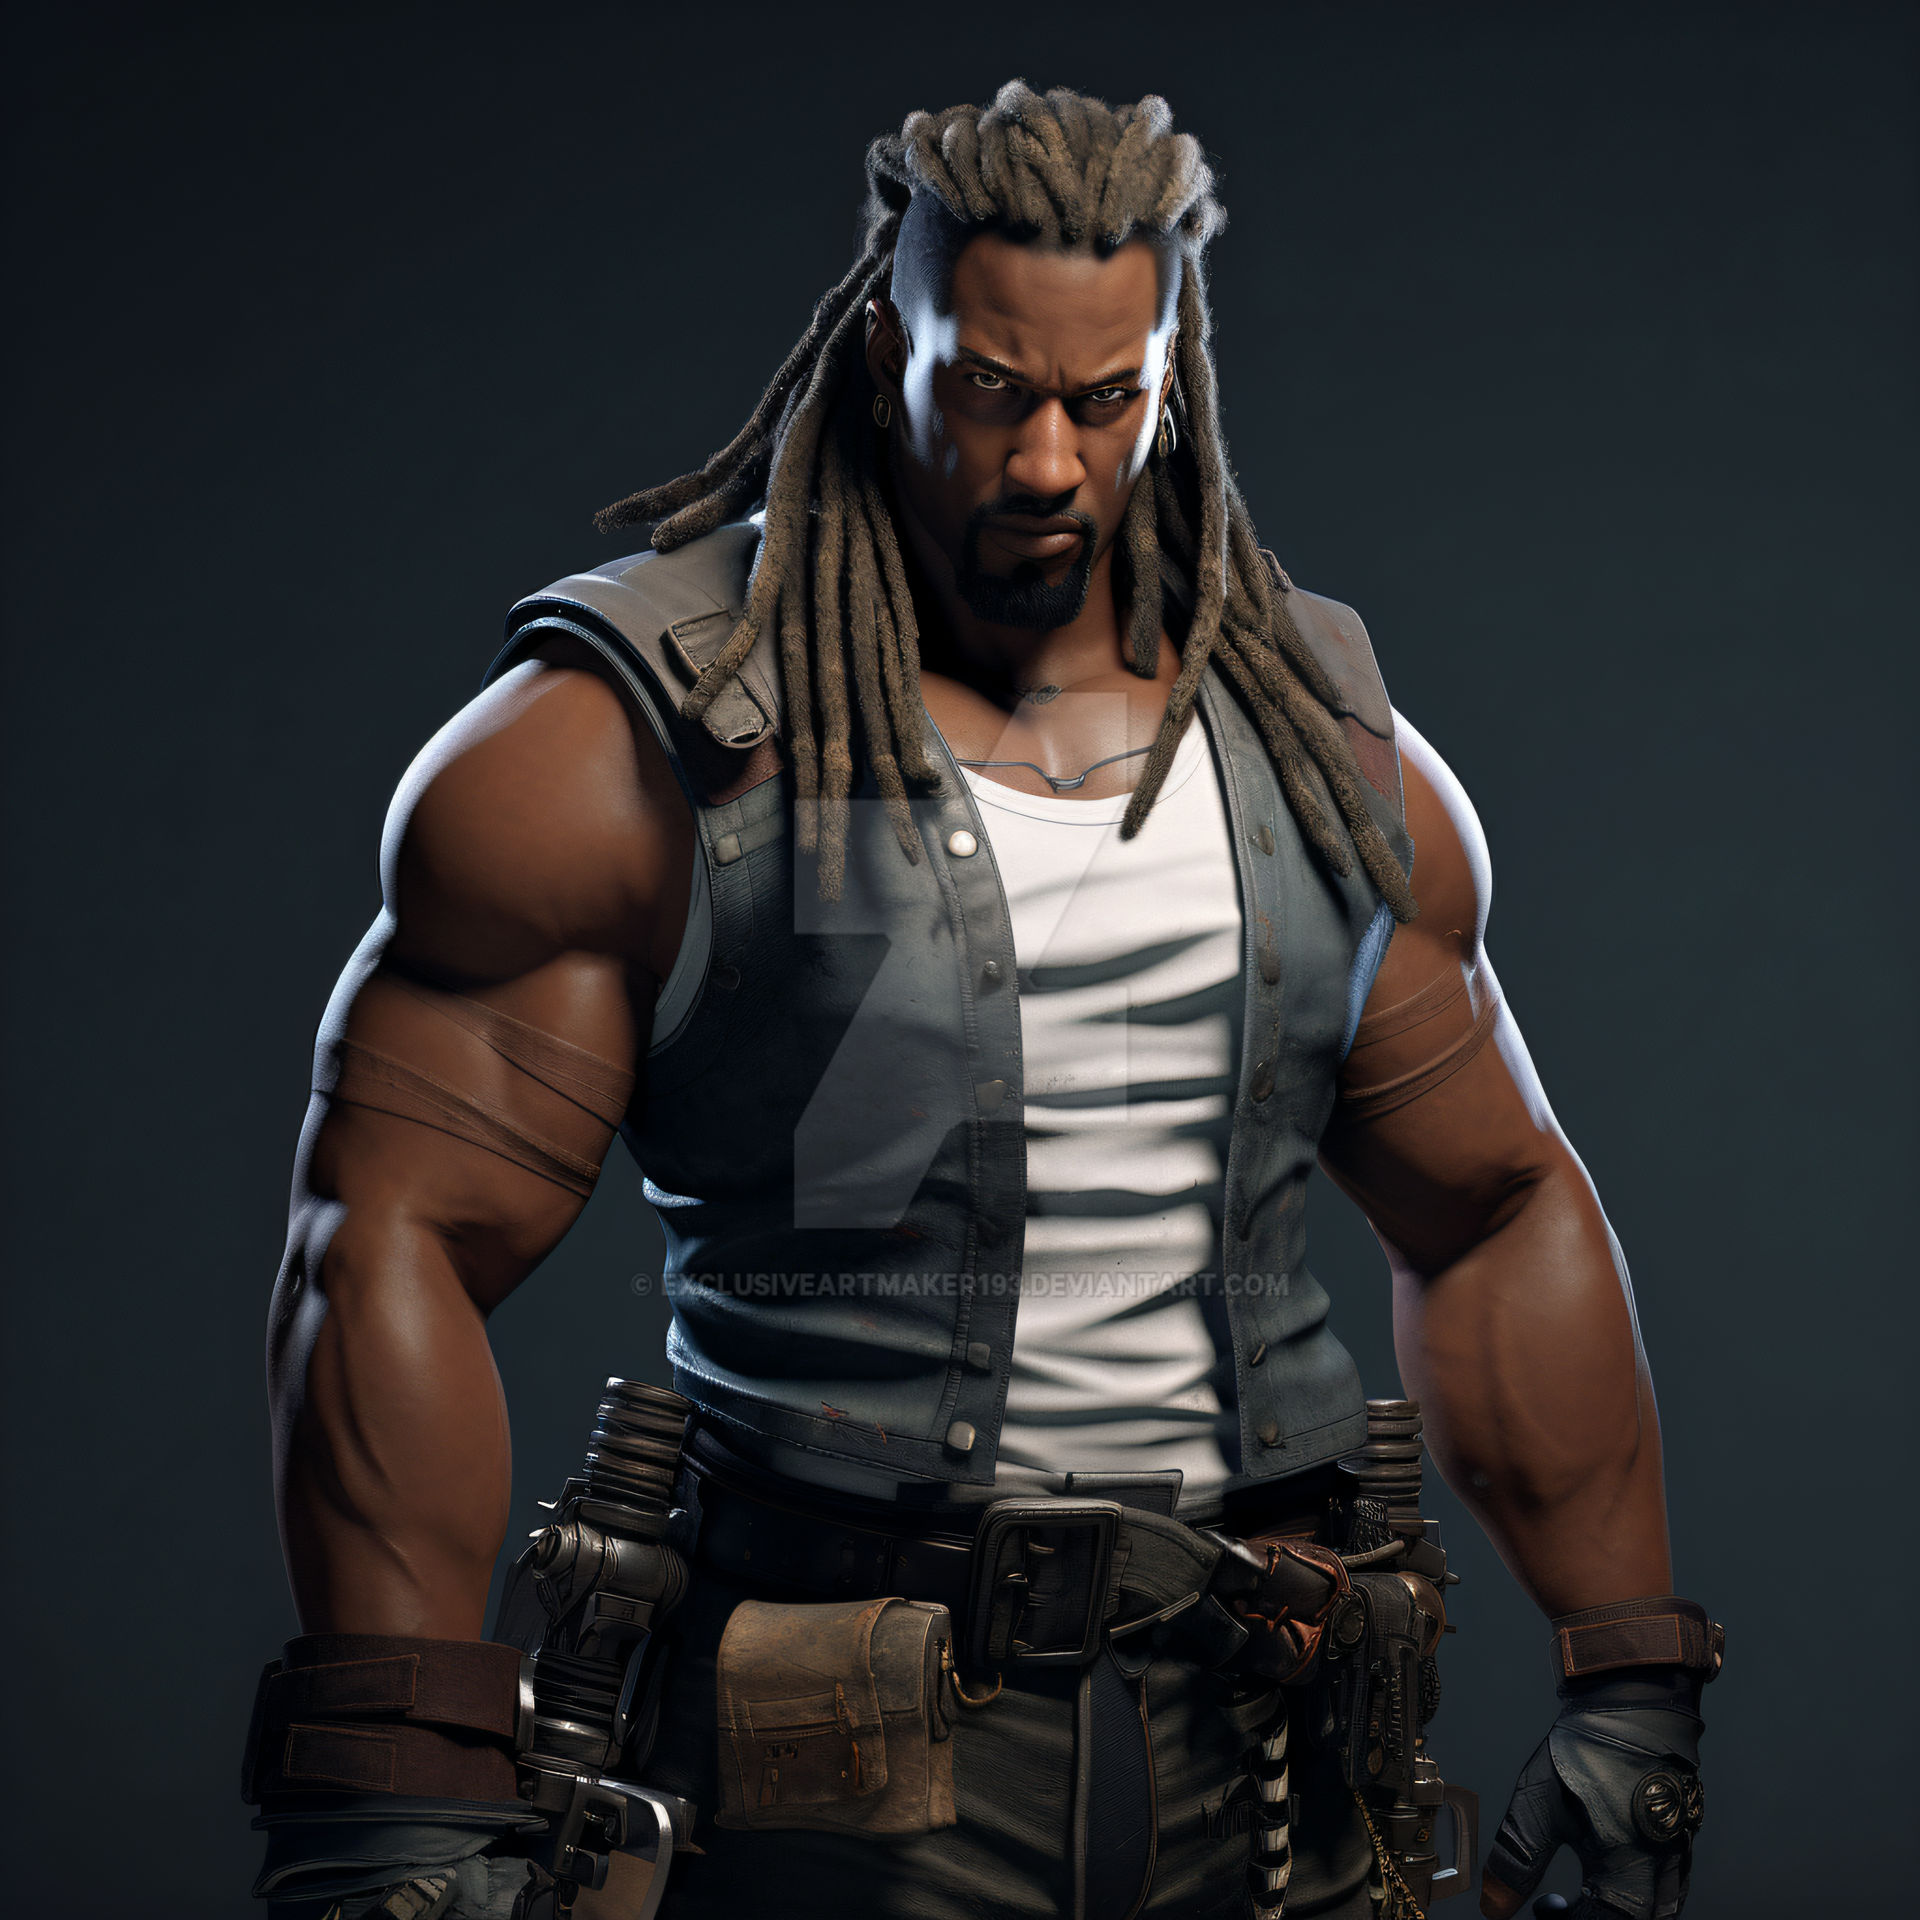 Barret Wallace. FF7. Concept Art by exclusiveartmaker193 on DeviantArt